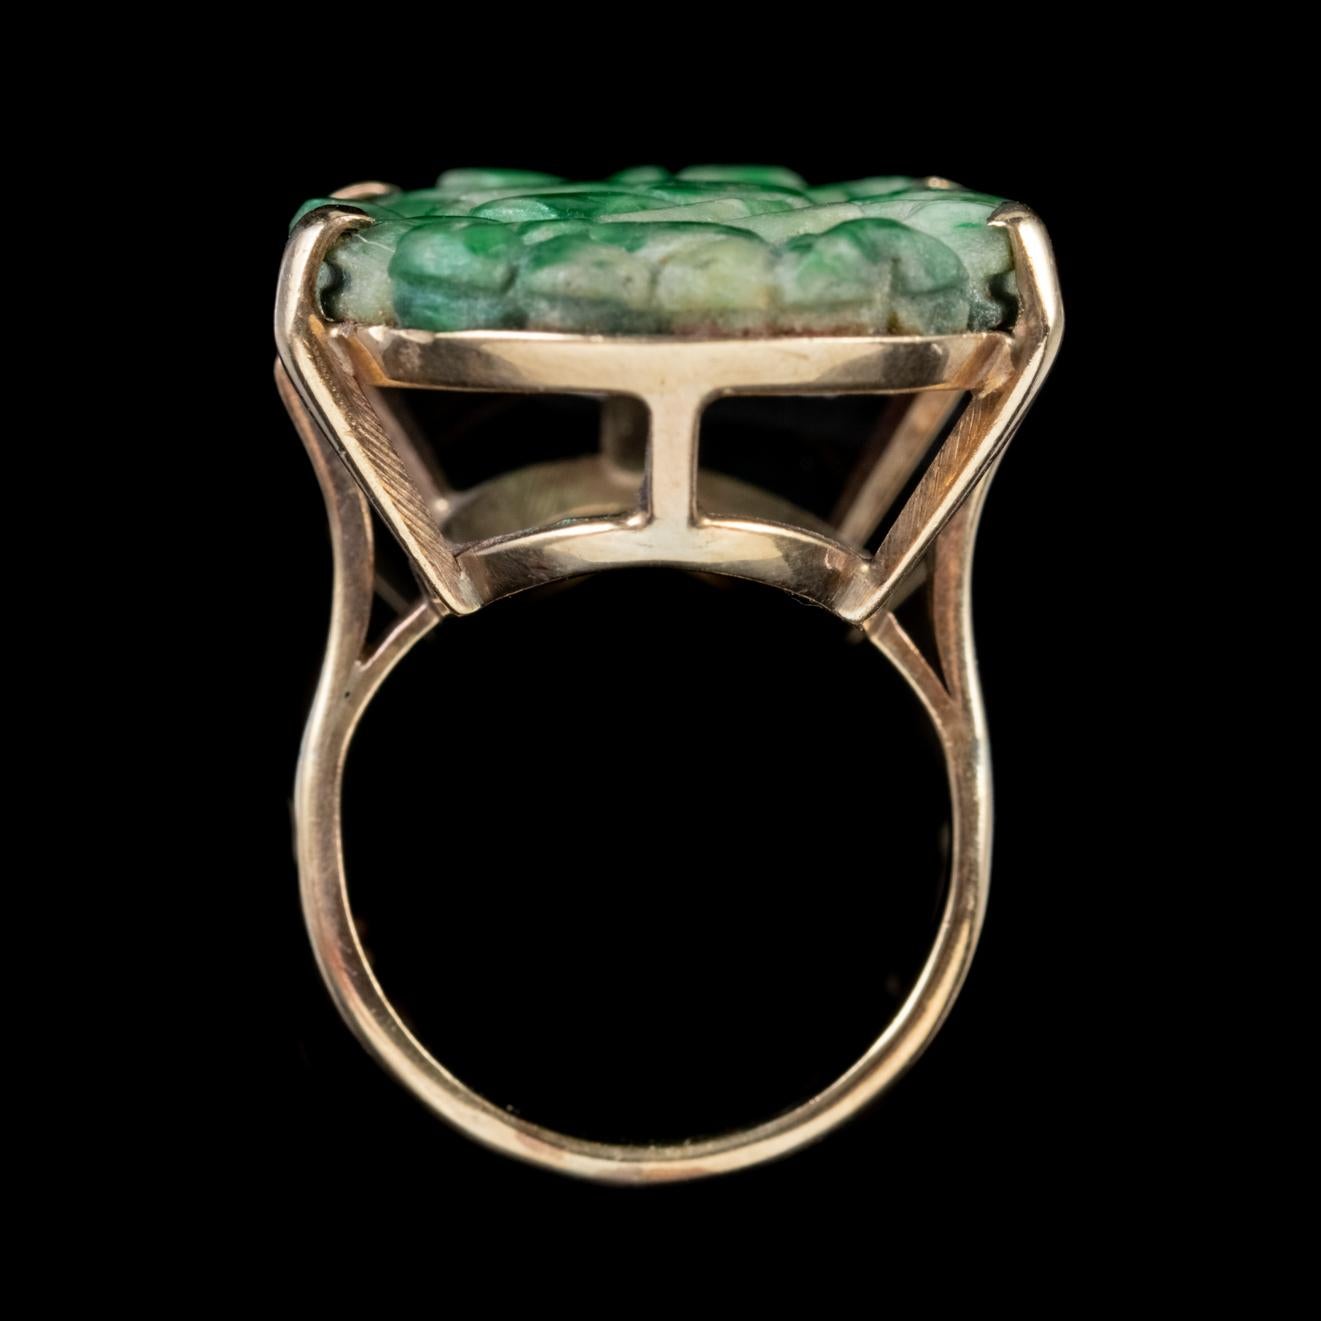 Women's Antique Victorian Hand Carved Jade Ring 18 Carat Gold, circa 1900